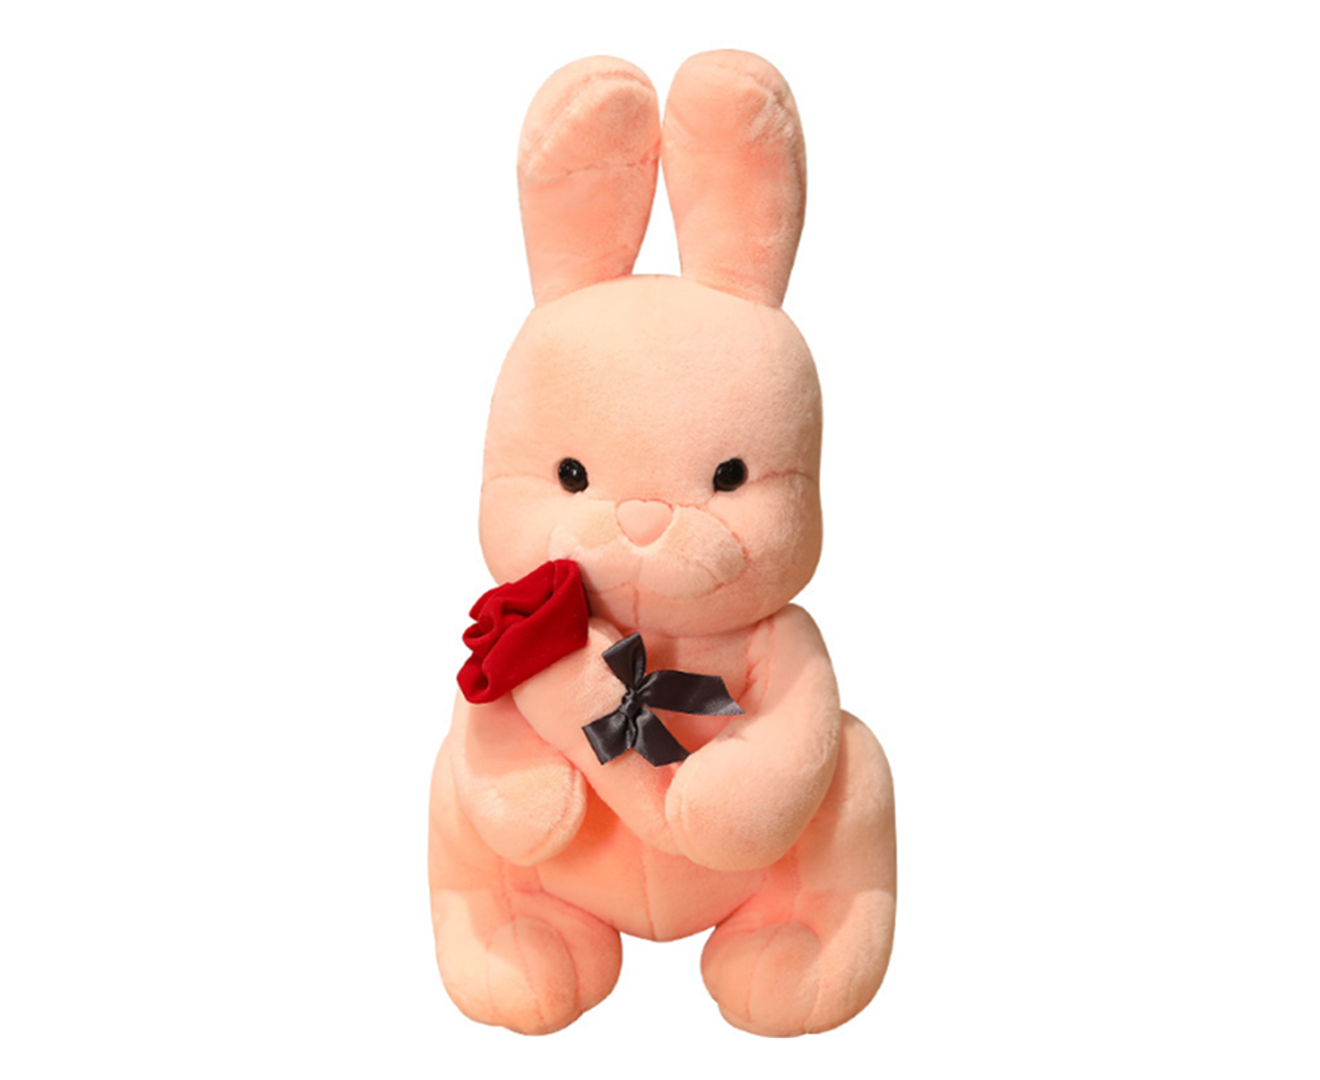 FOUND - Carter's Tykes CUDDLE ME Pink BUNNY Musical Pull Lovie